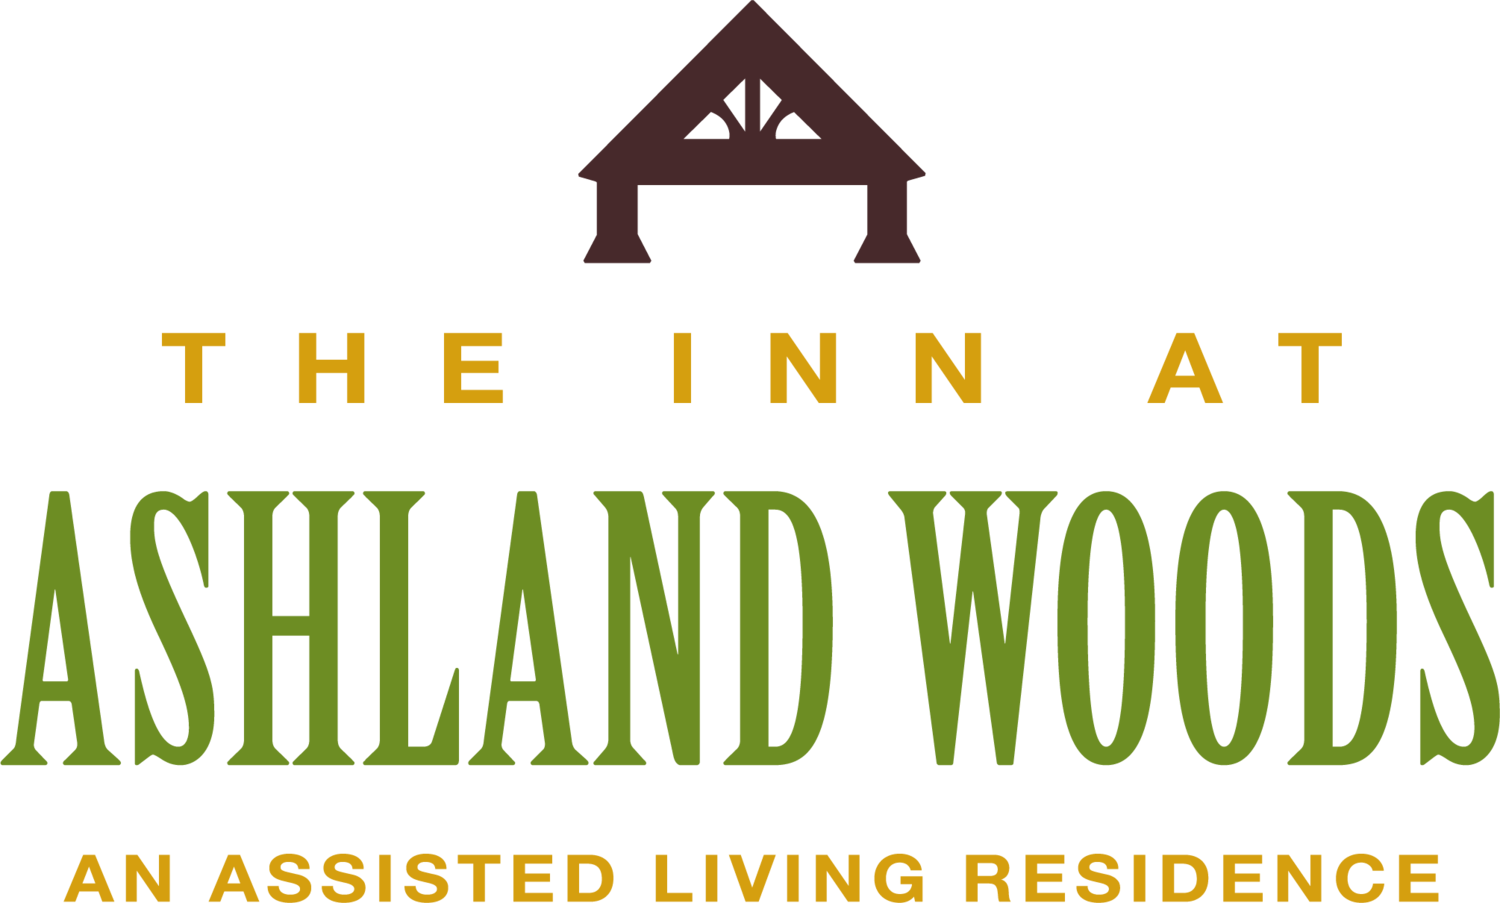 Assisted Living at the Inn at Ashland Woods